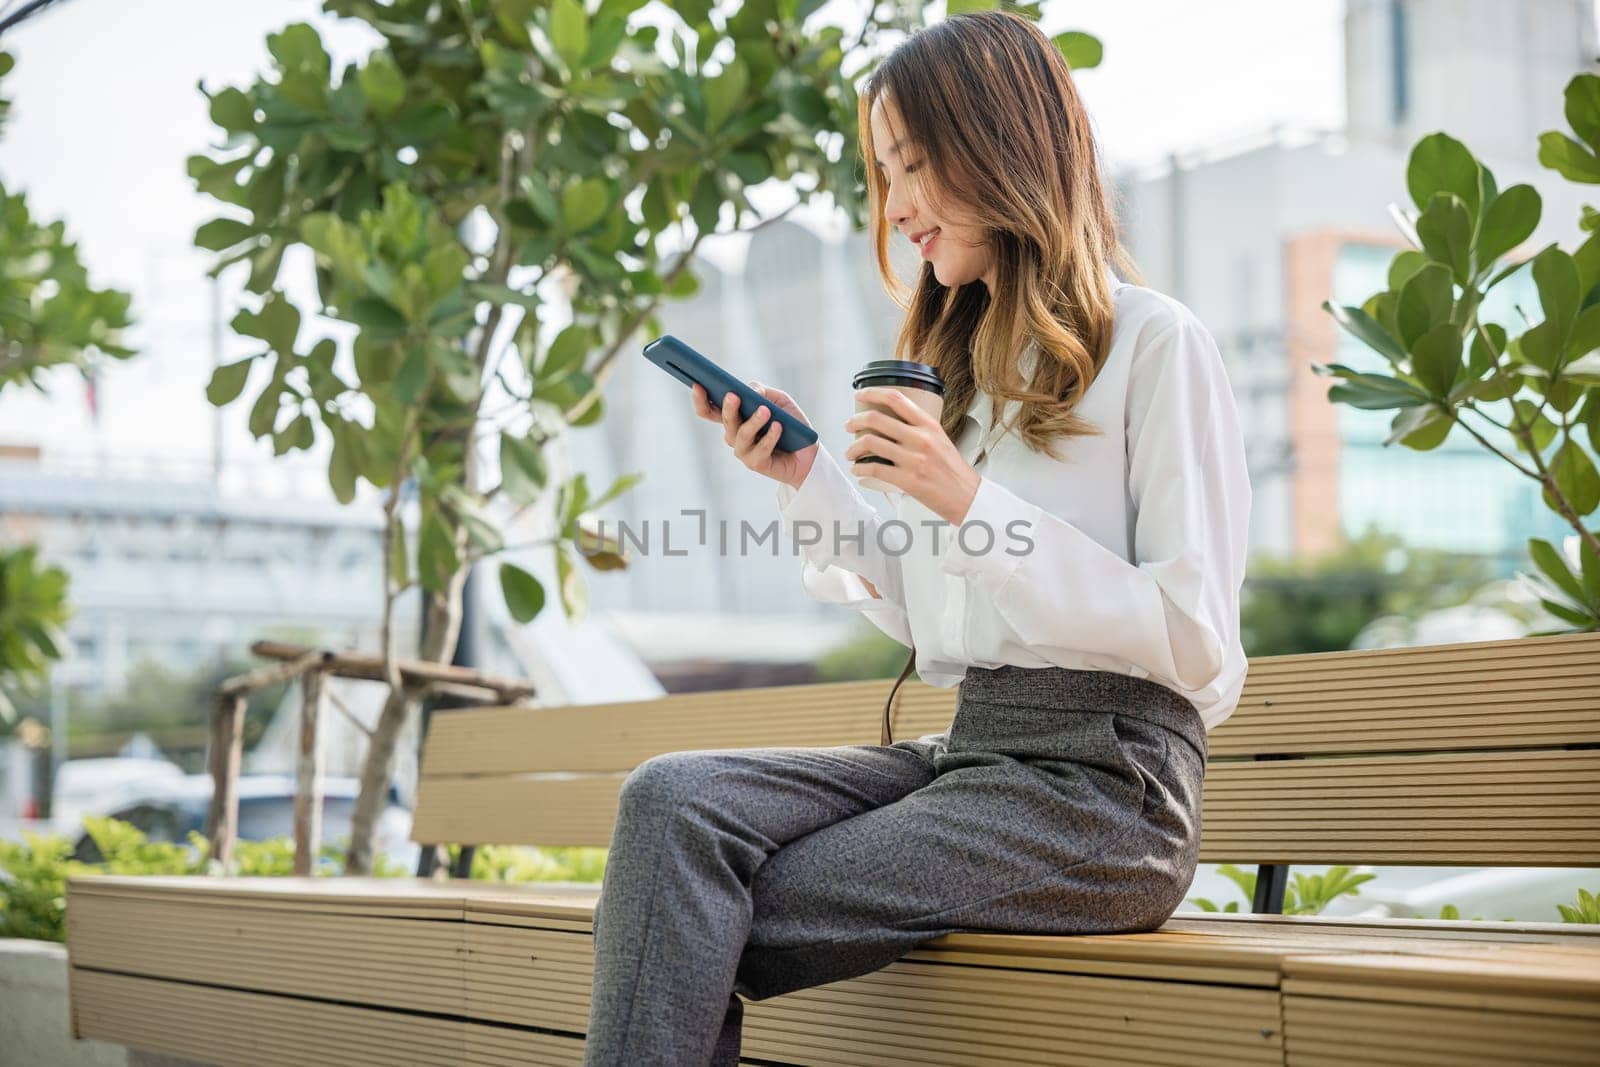 Smiling woman sitting on bench outdoor on the park using smartphone chatting social media by Sorapop